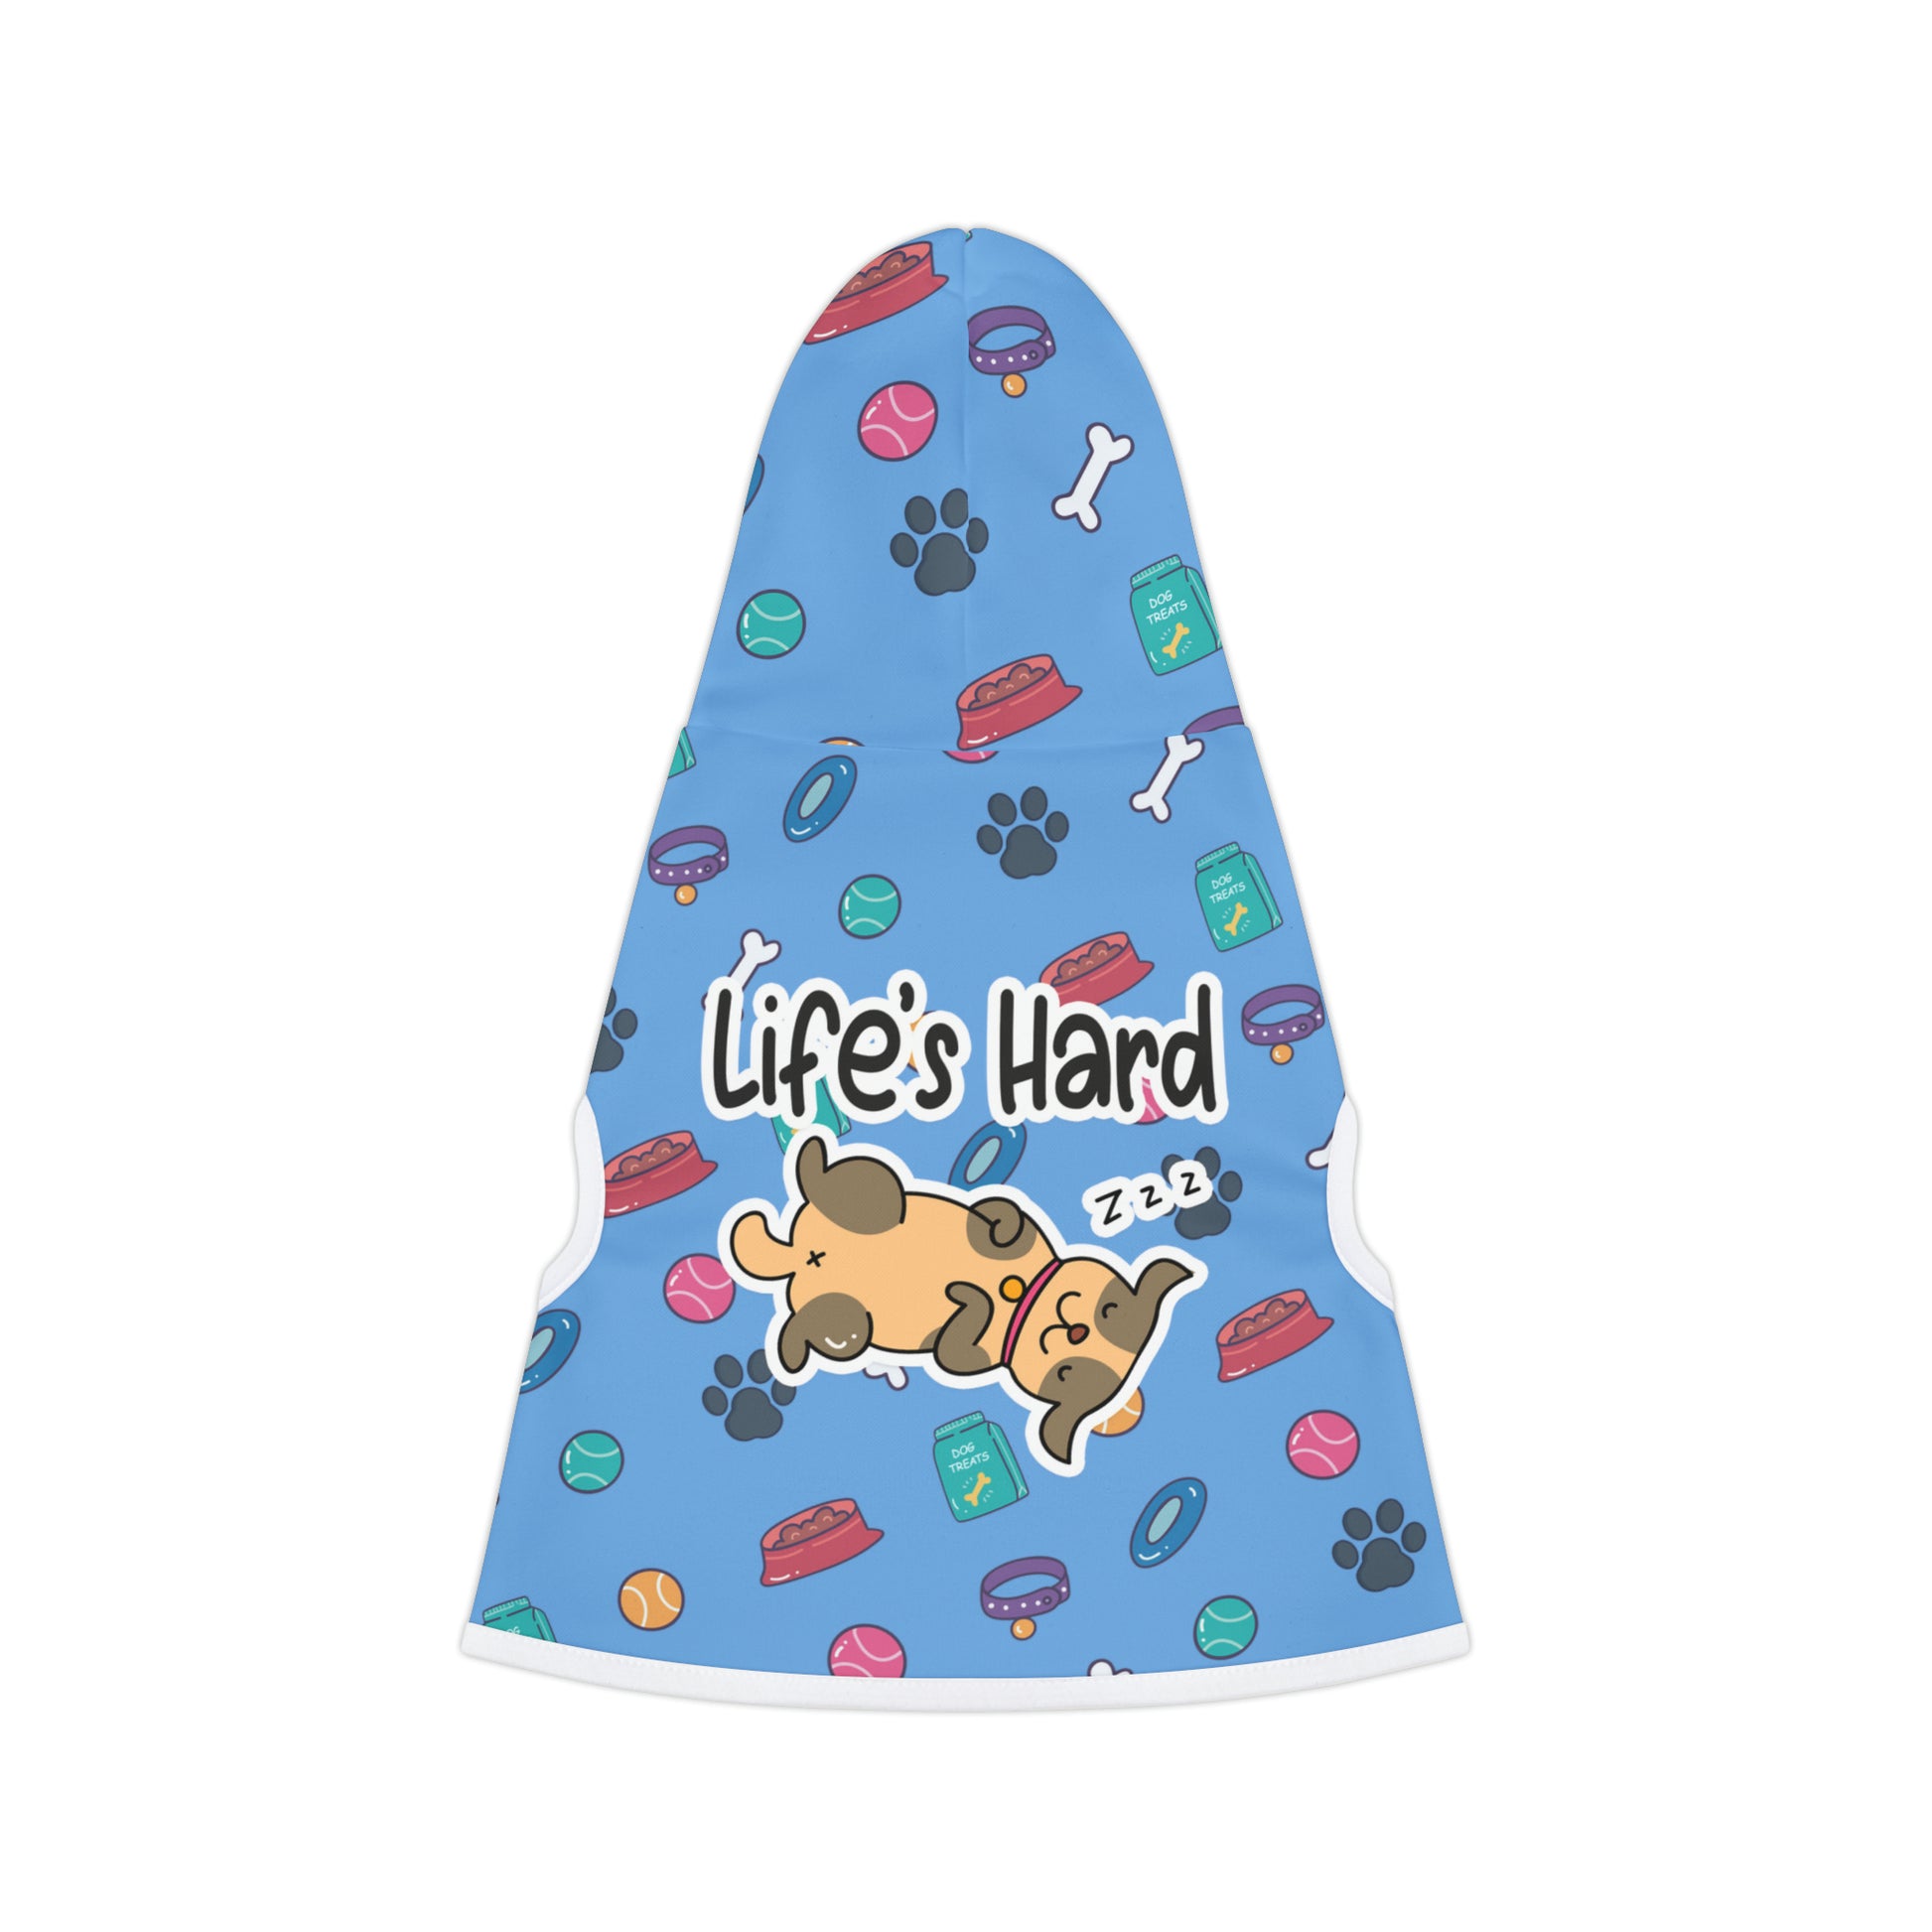 A pet hoodie with a beautiful pattern design featuring all things dog love. A smiling dog sleeping below a message that says "Life's hard". Hoodie's Color is blue